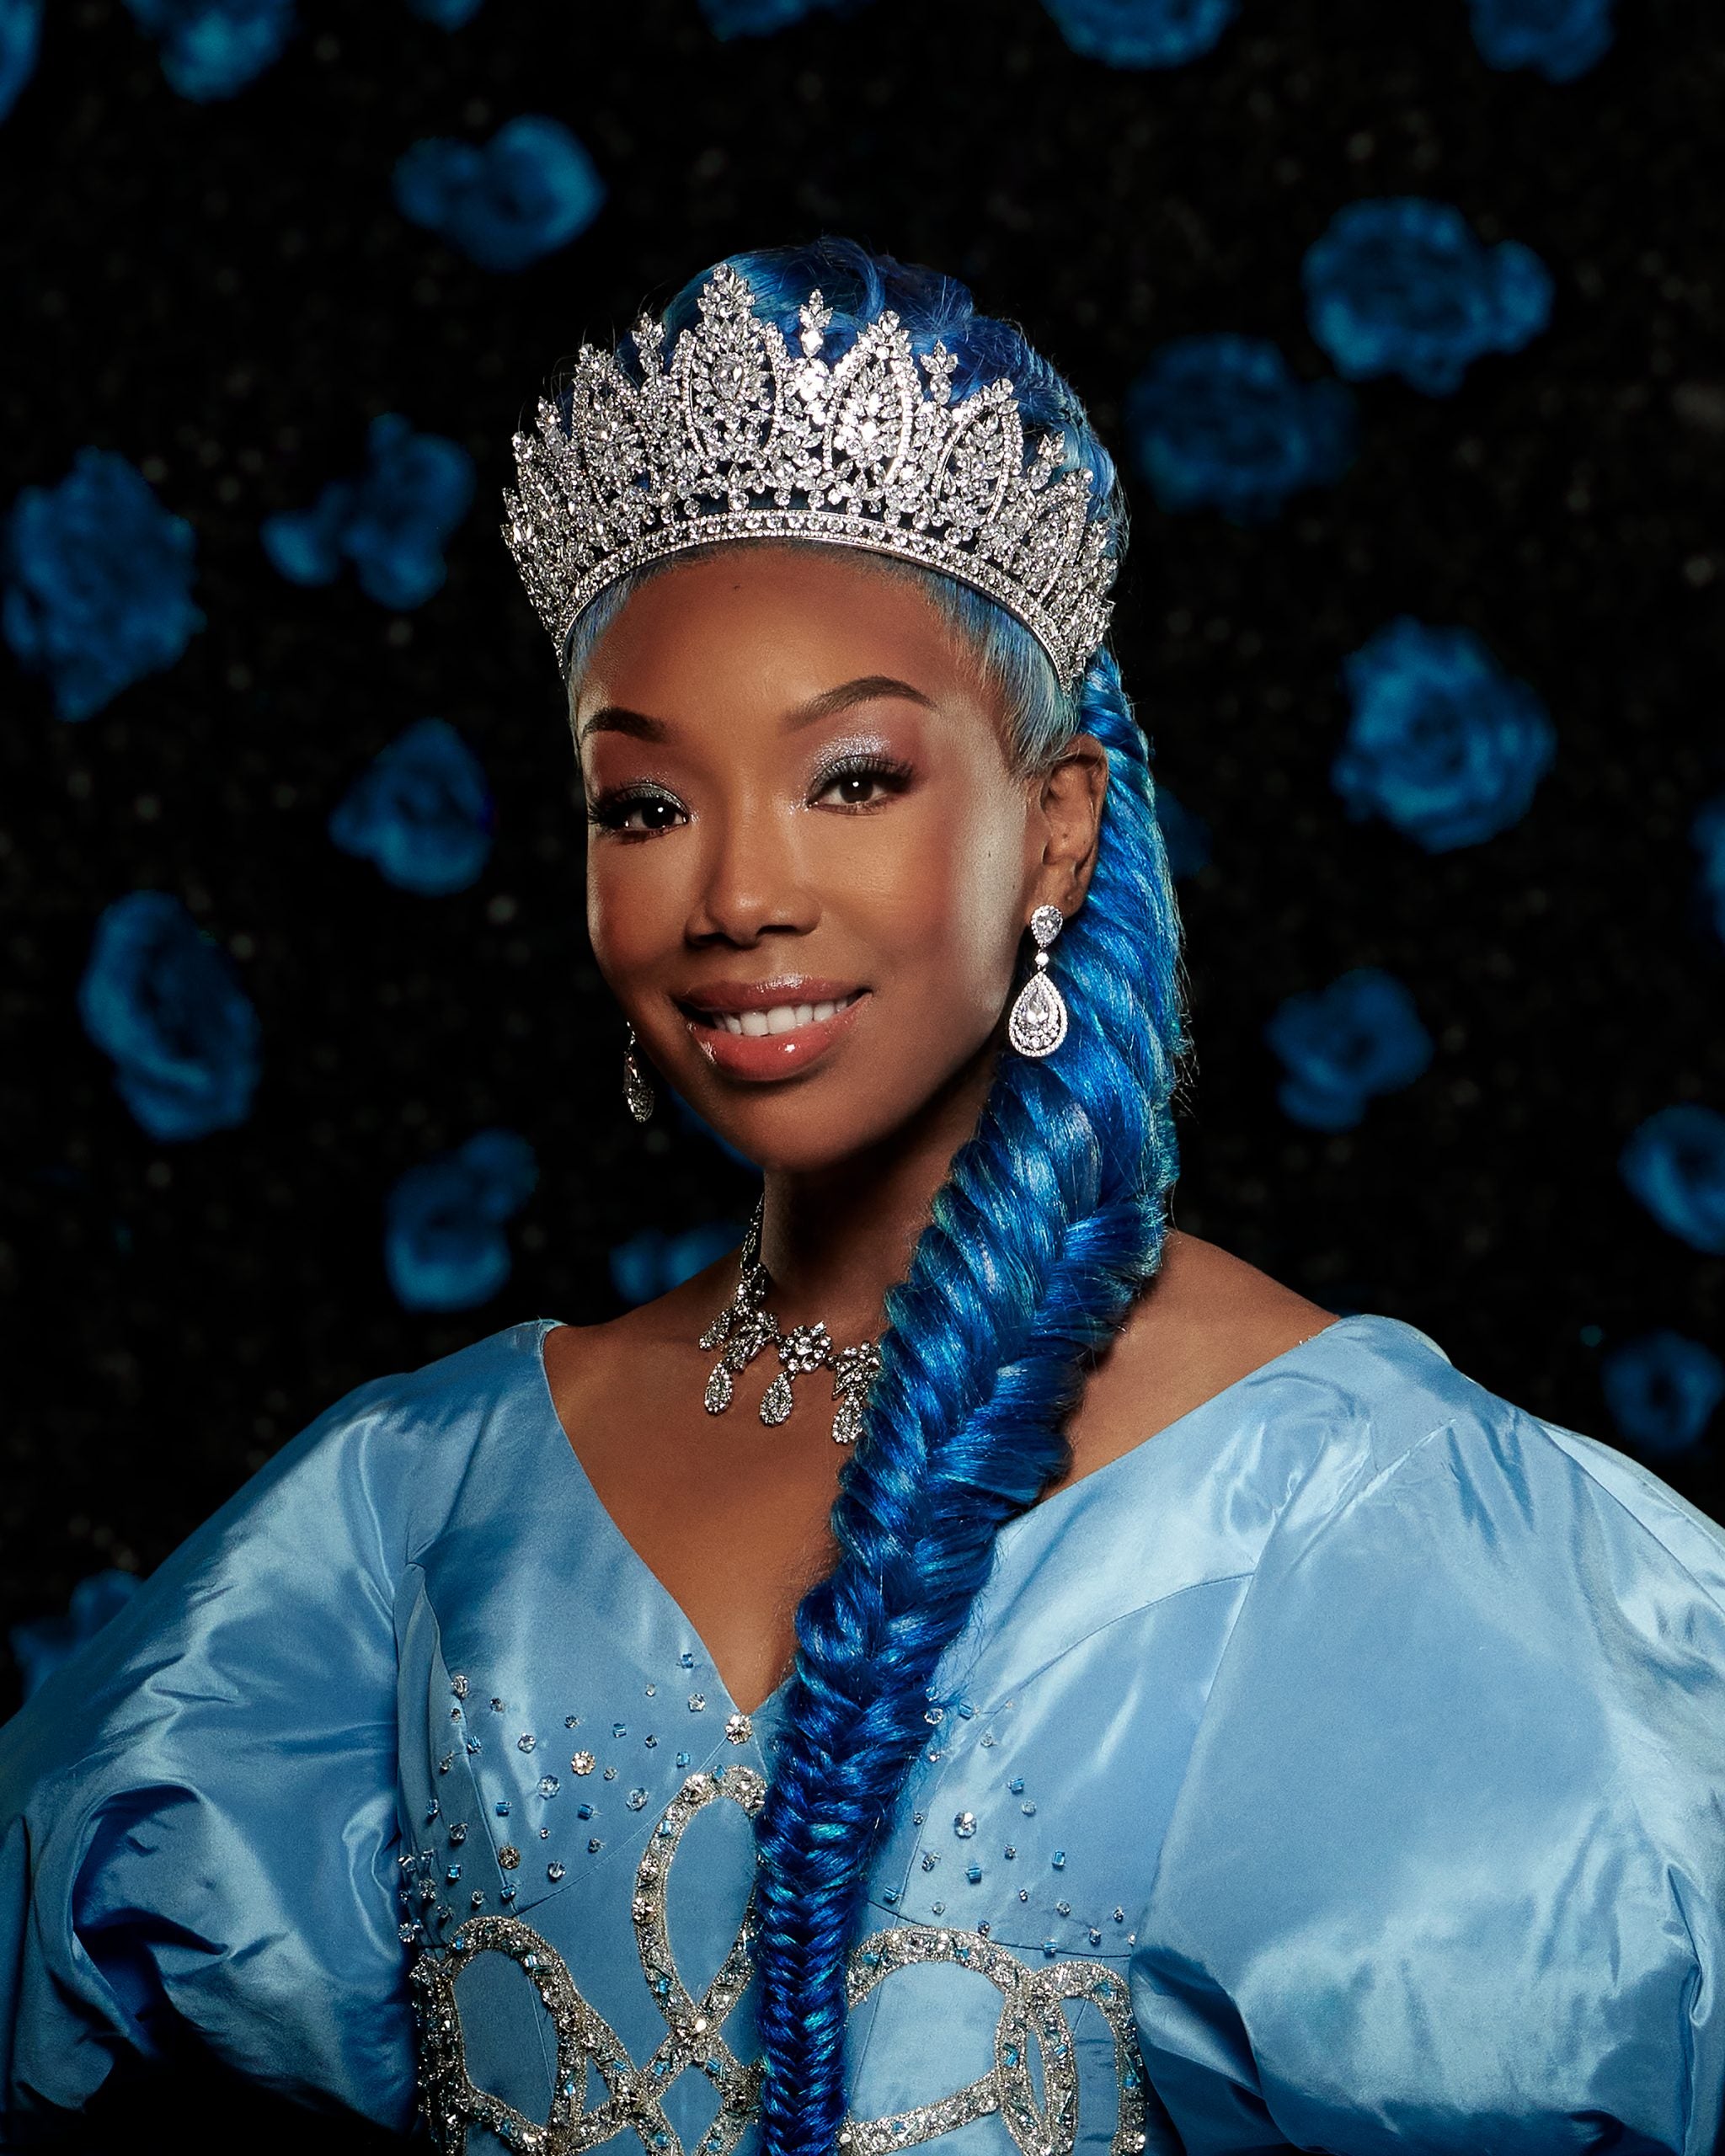 EXCLUSIVE: Brandy Reprises Her Role As Cinderella in Disney’s “Descendants: The Rise of Red”